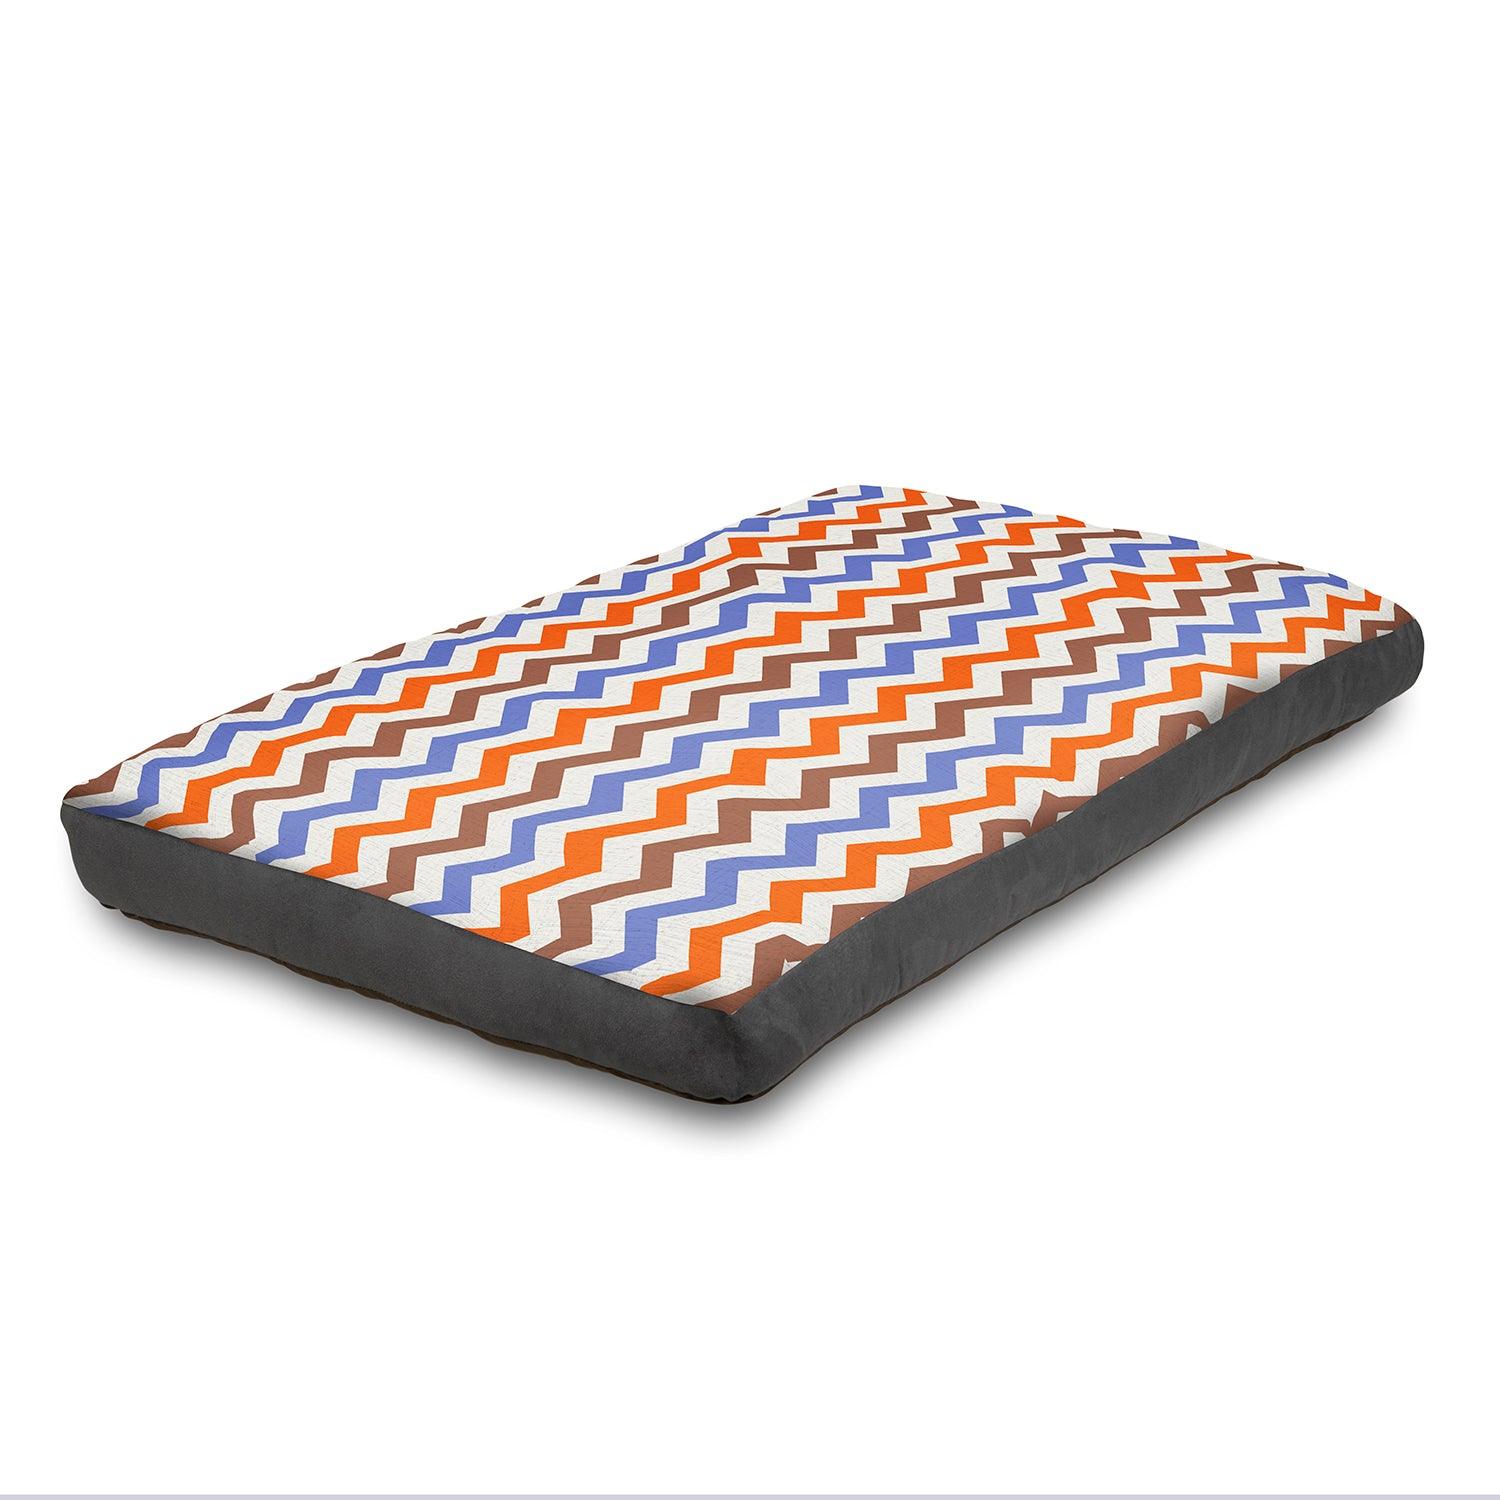 View Super Comfy Dog Bed Soft and Fluffy with Washable Cover XLarge 150 cm x 100 cm Zigzag information